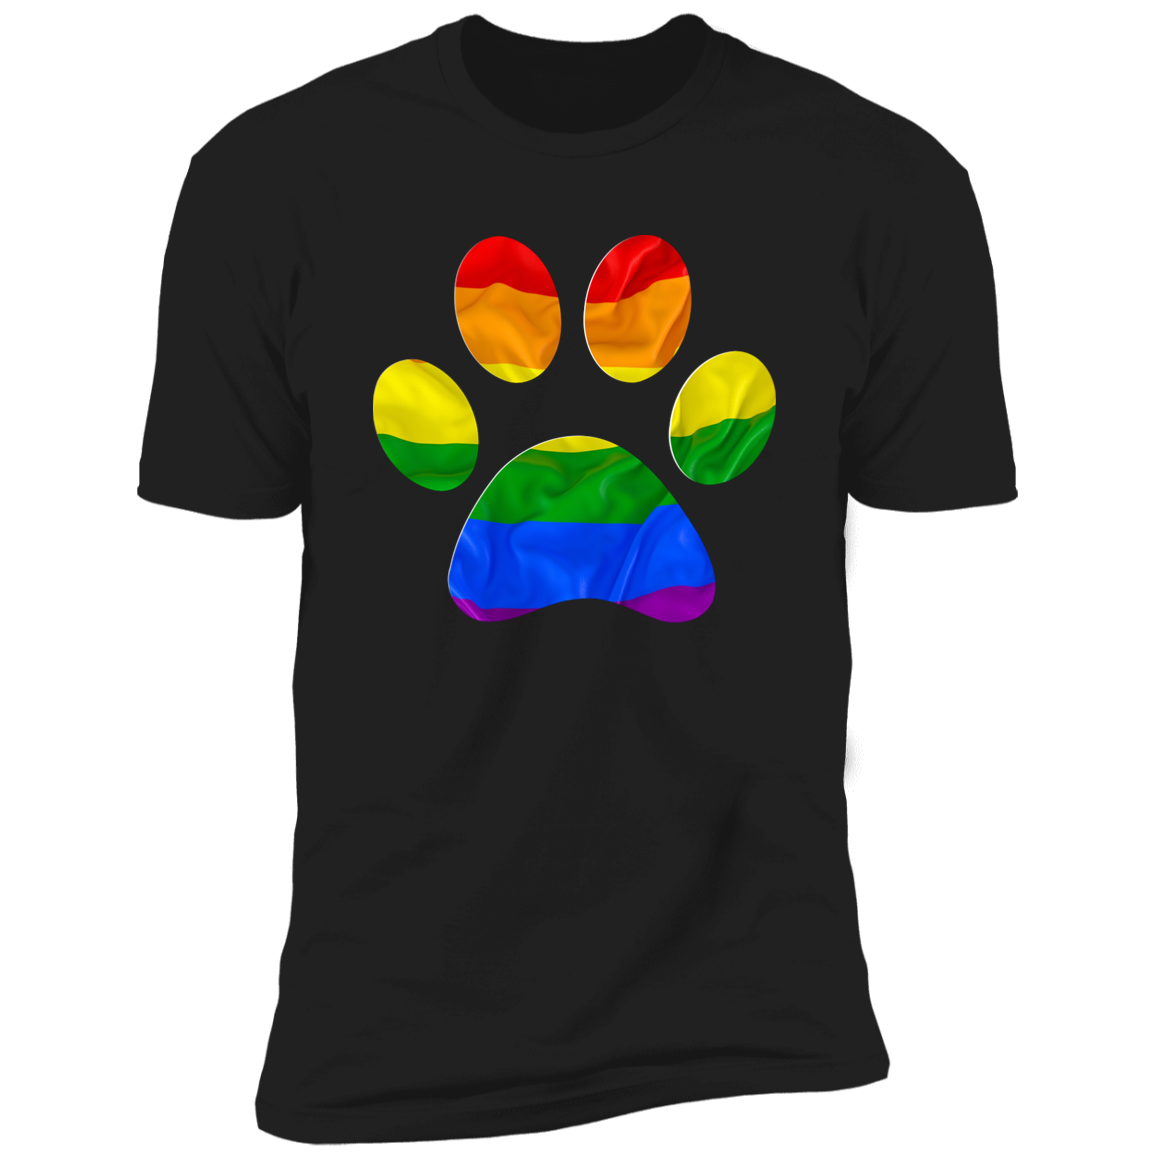 Pride Paw Pride T-shirt, Paw Pride Dog Shirt for humans, in black